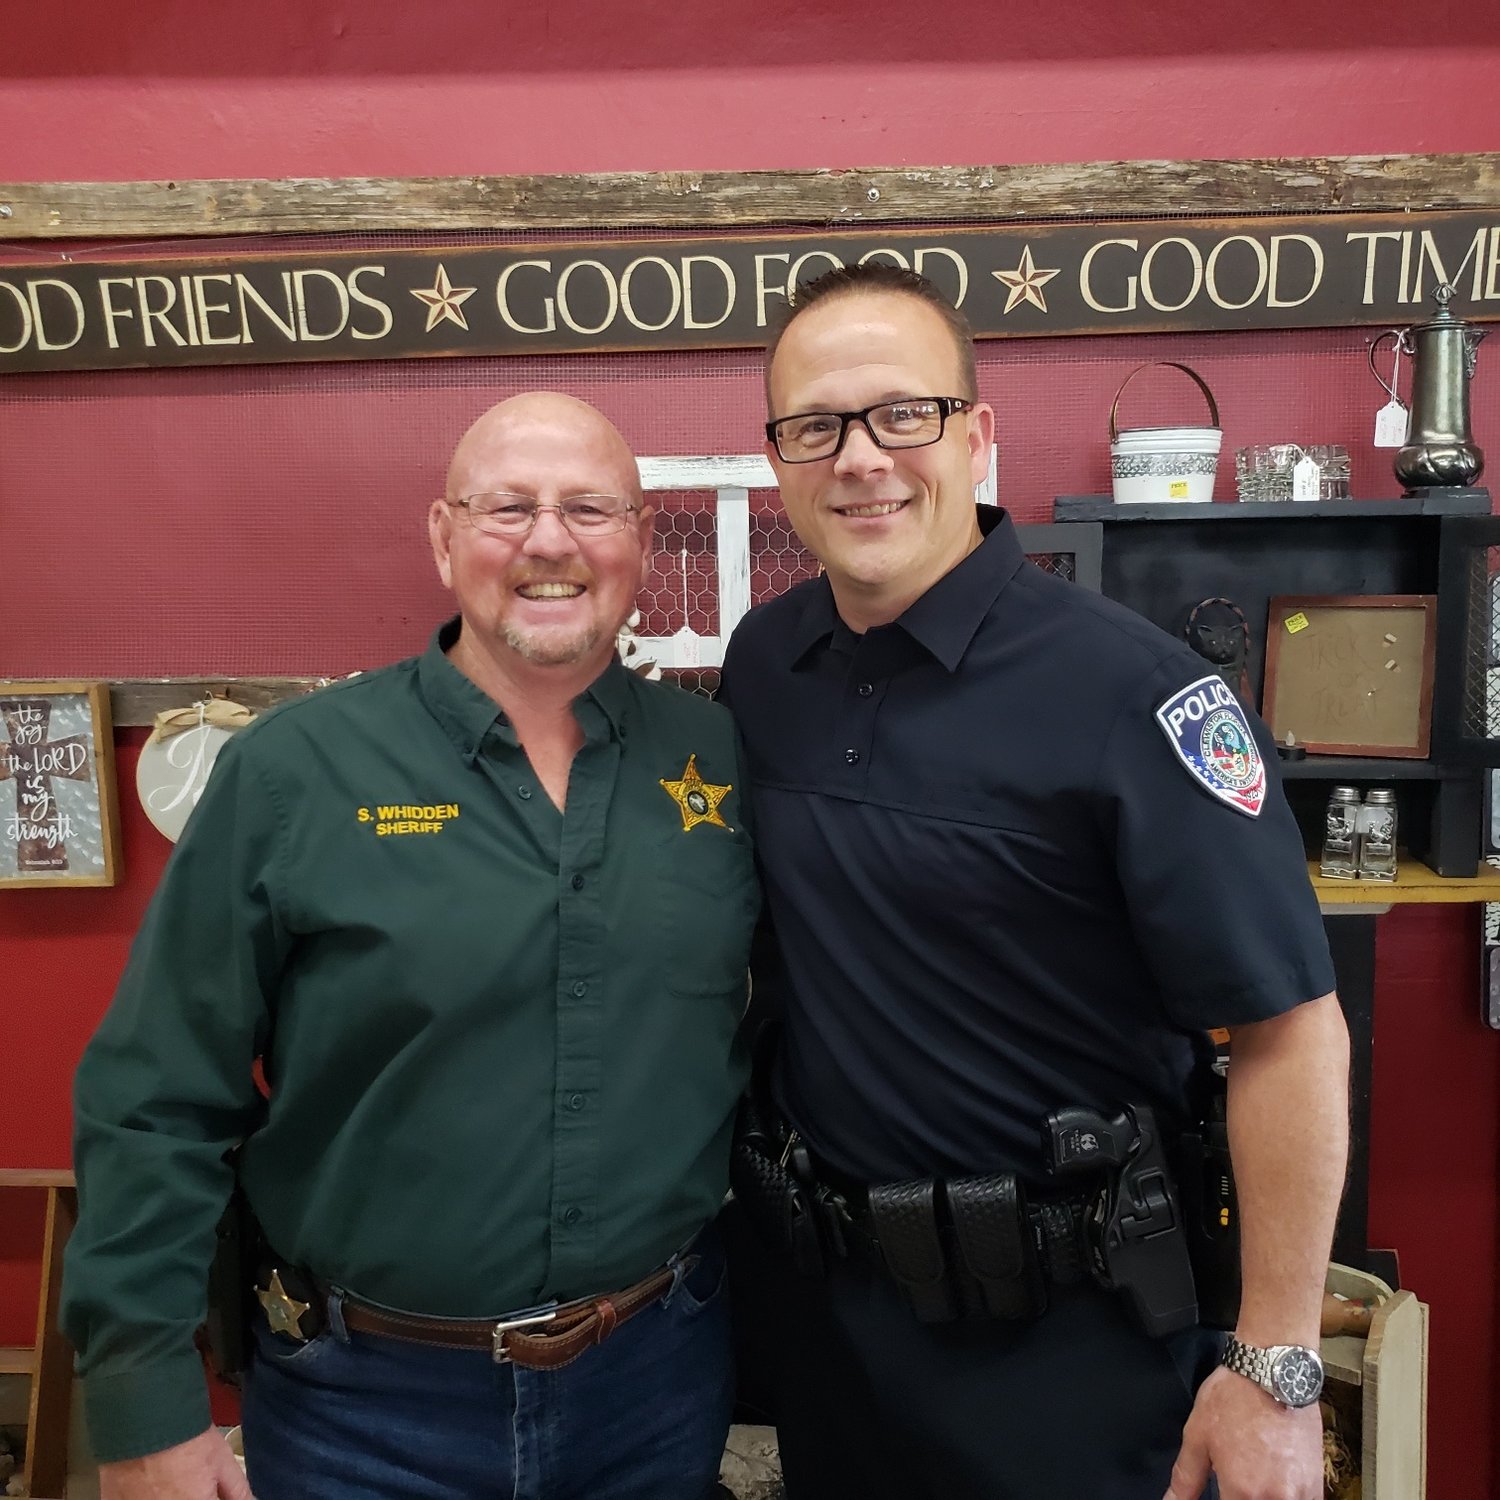 Hendry County Sheriff Steve Widden (left) attended the first "Coffee with the Chief" event, hosted by Clewiston Police Interim Chief Thomas Lewis (right) at Common Grounds Coffee Shop Sept. 22. The Clewiston Chamber of Commerce coordinated the event.